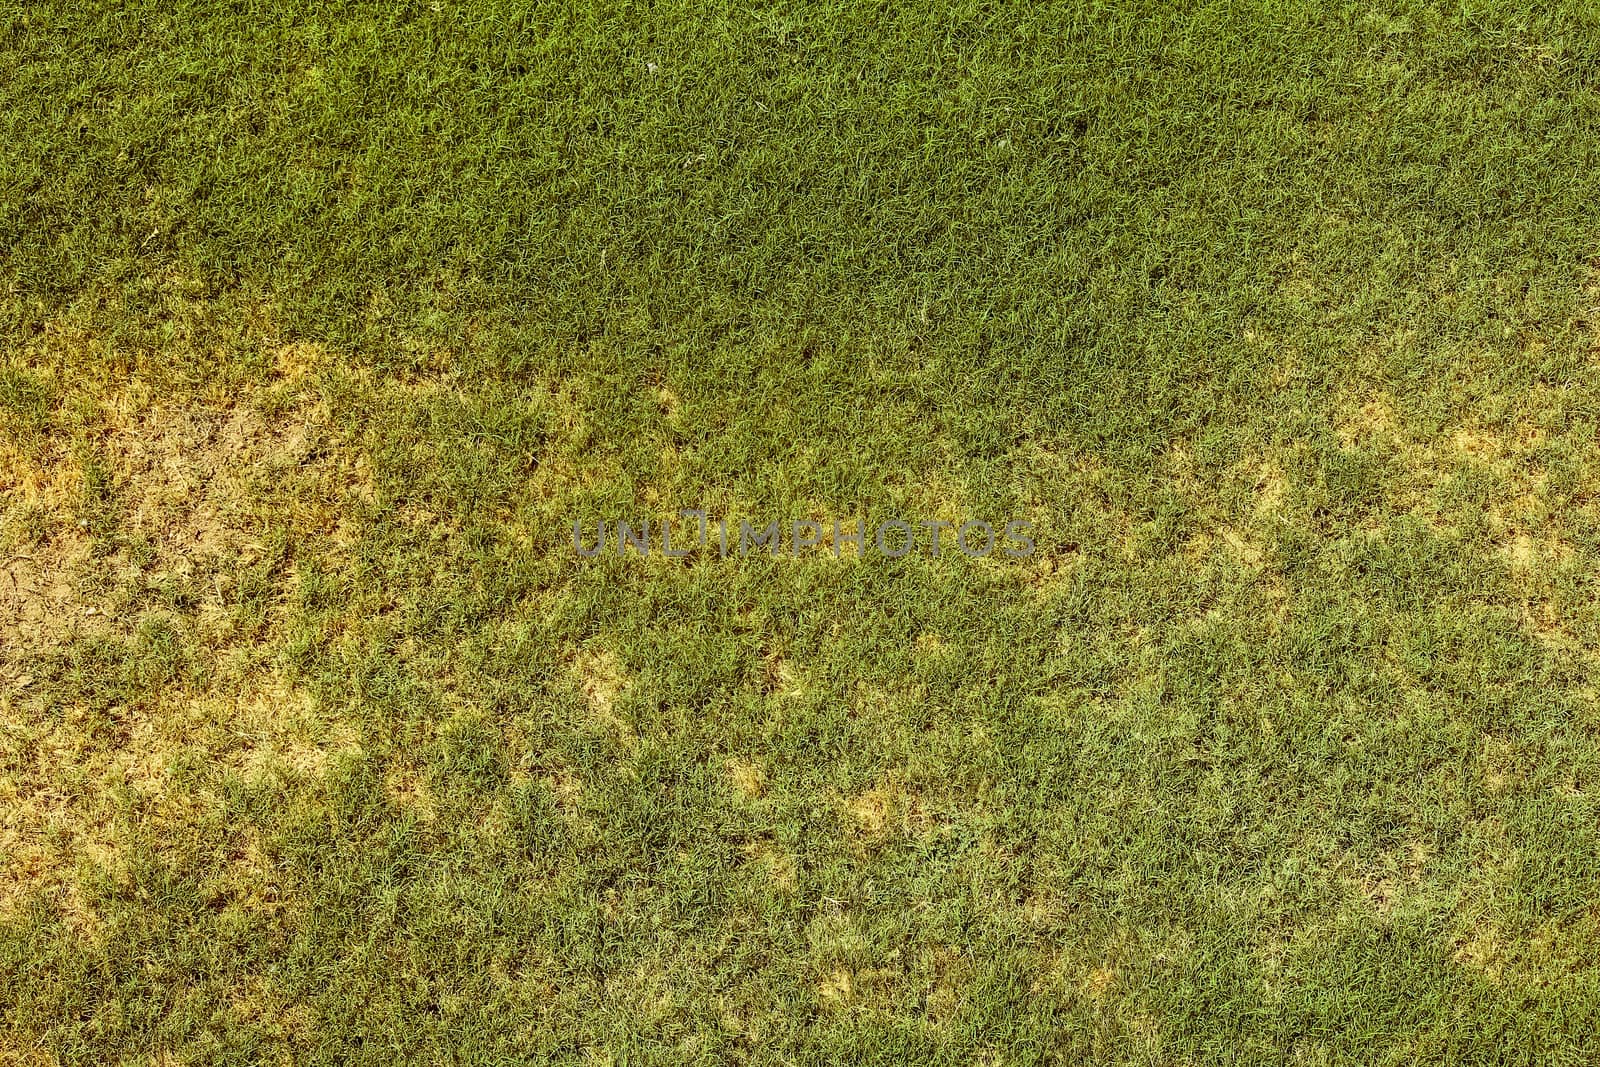 Green grass picture used as texture or background for any design by frameshade